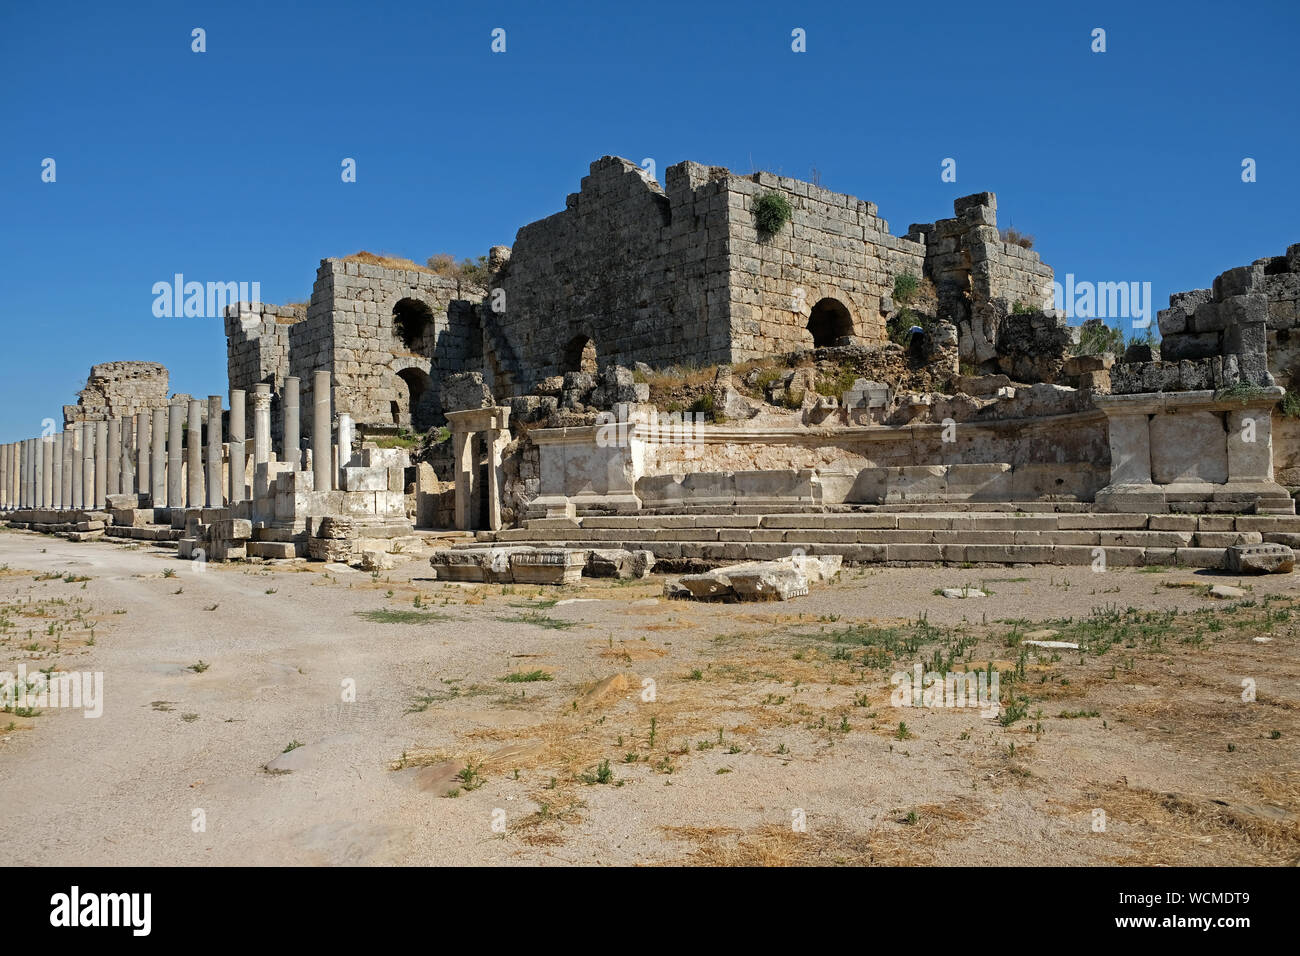 The historical site of Perge, 18 kilometers east of Turkey, holds the vast remains of what was once the most propserous city of the ancient world. Stock Photo